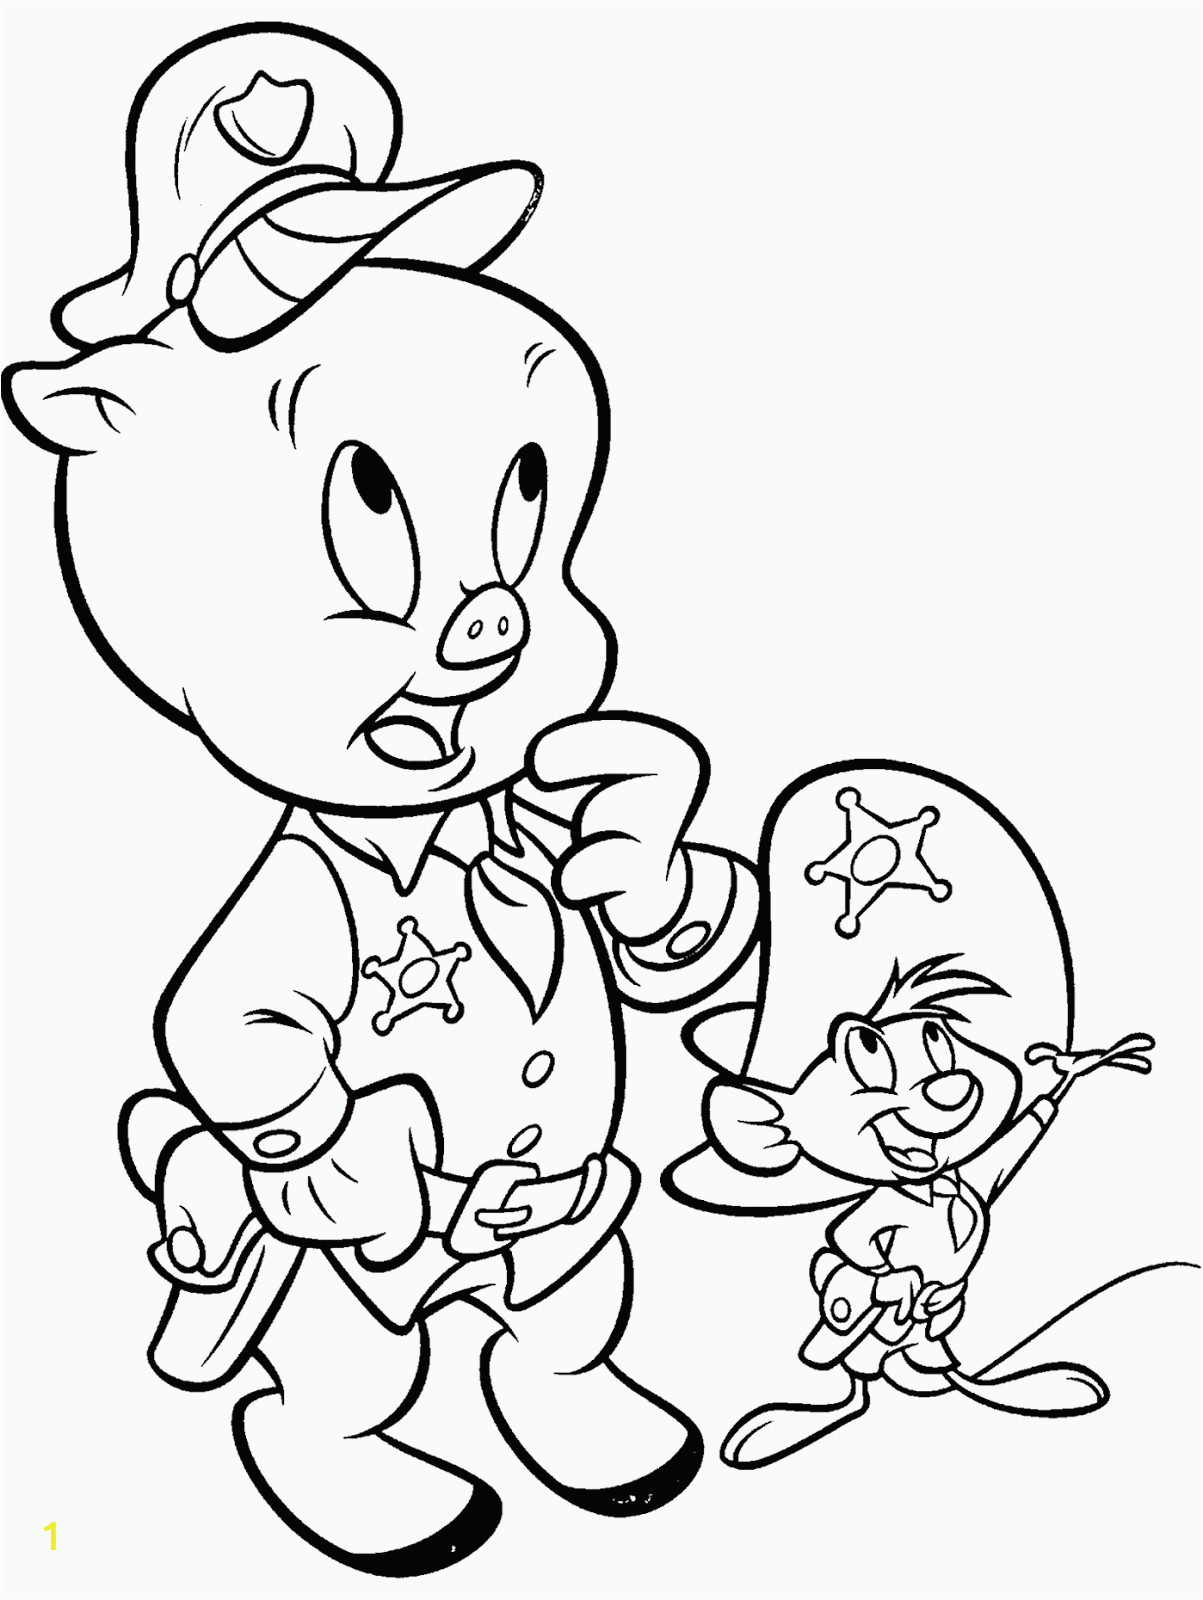 Free Printable Looney Tunes Coloring Pages Porky Pig Coloring Pages Looney Tunes